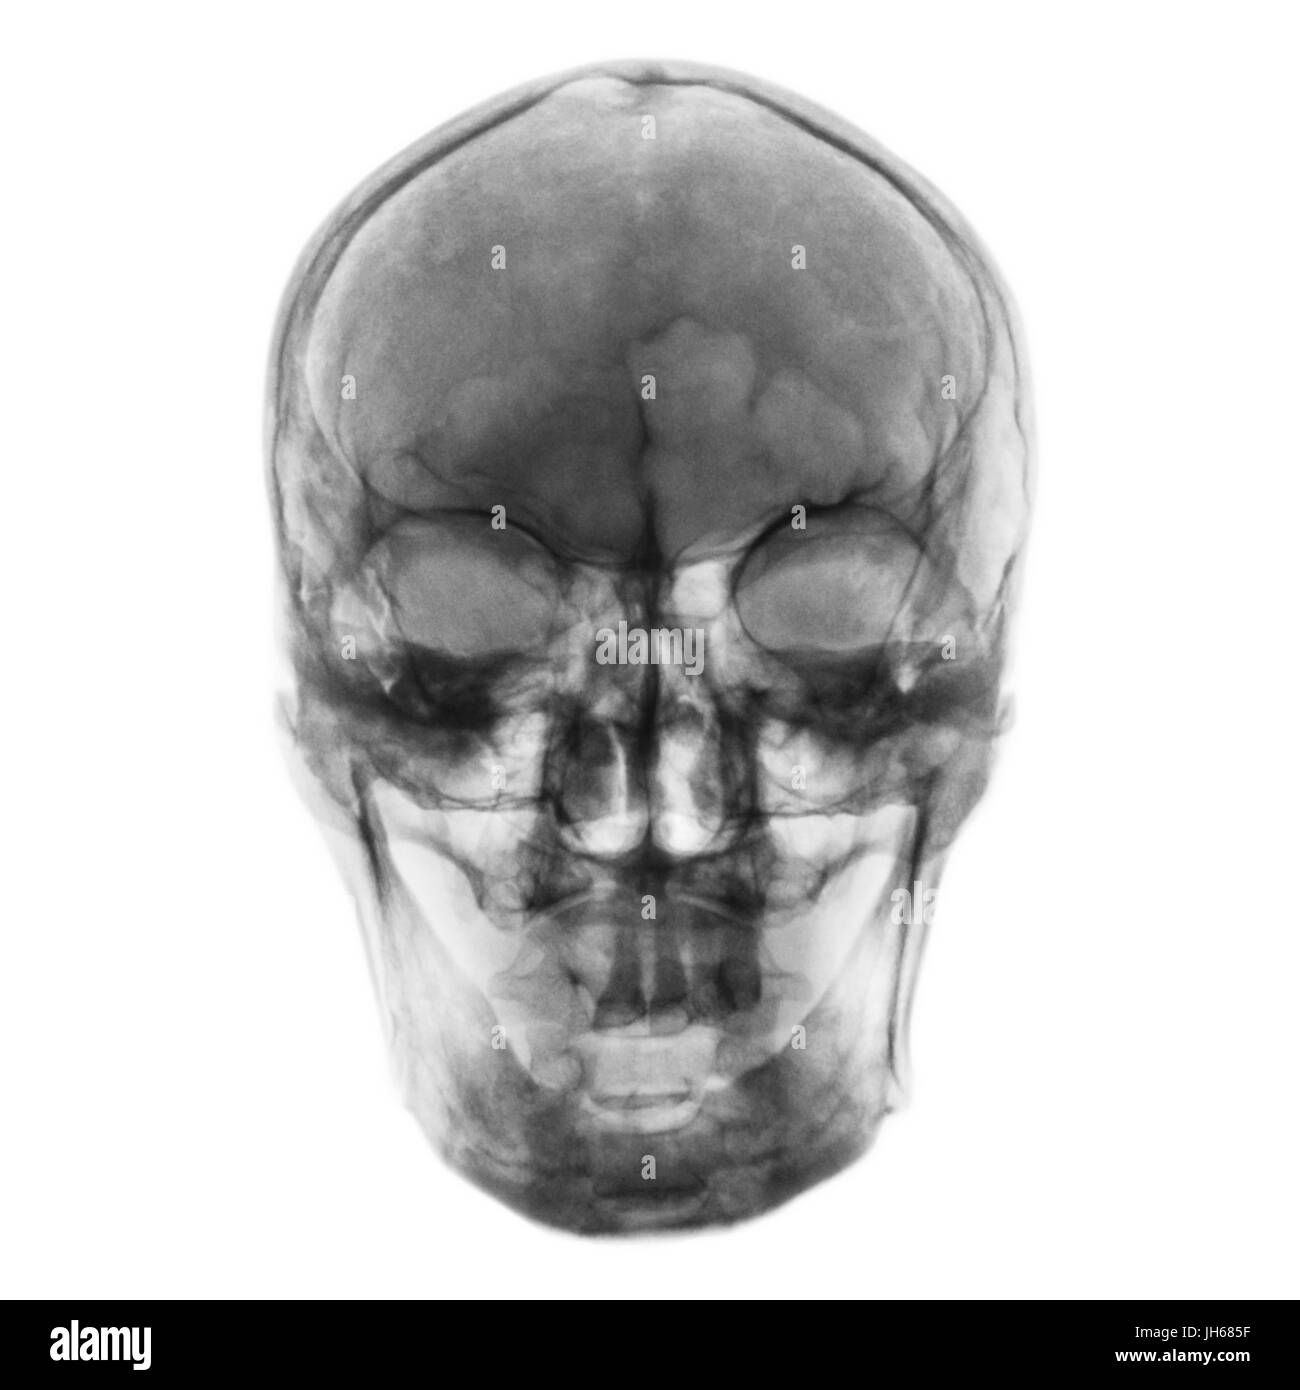 List 105+ Images real human skull front view black and white Updated